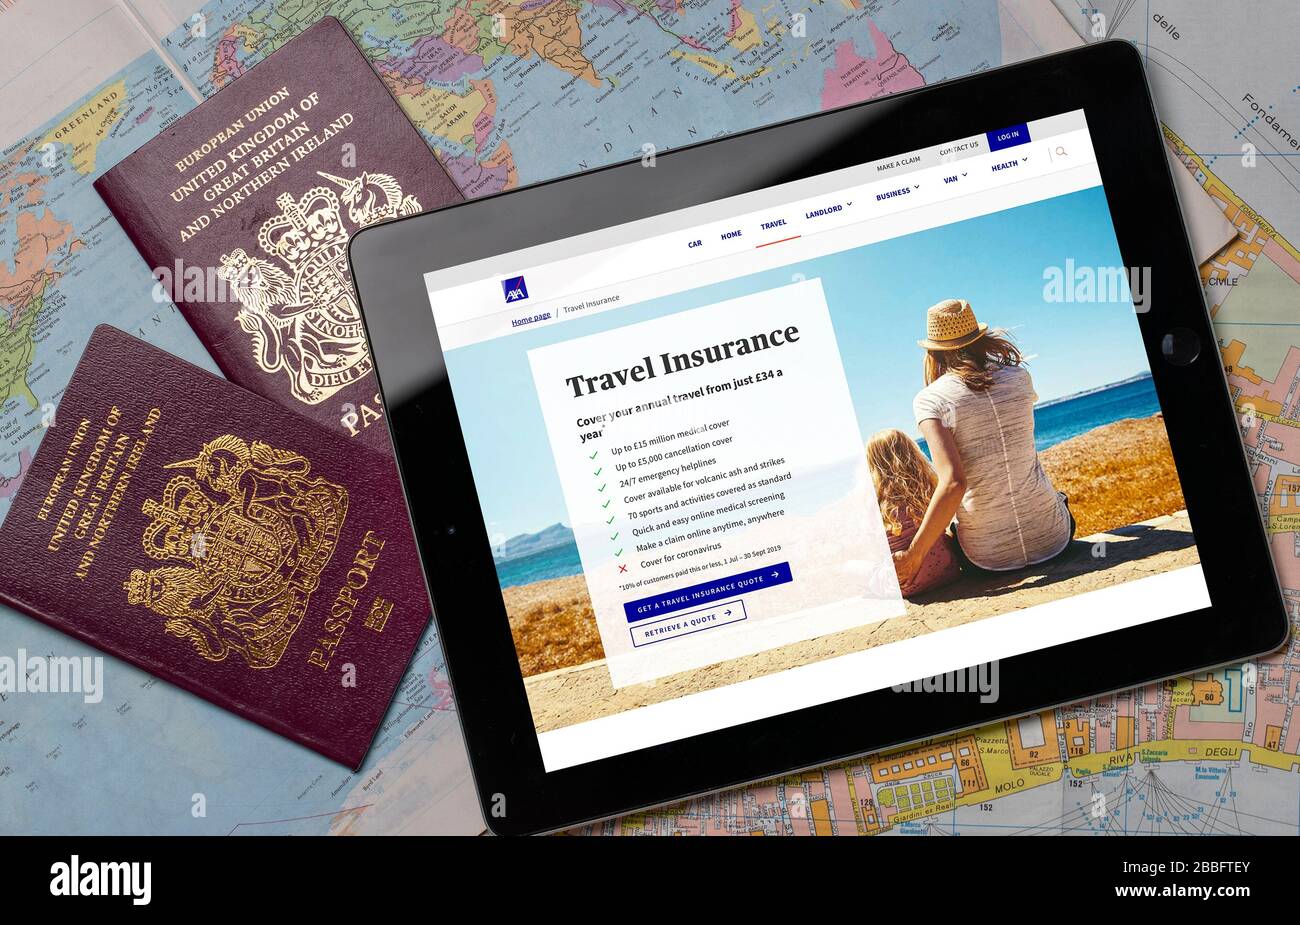 AXA Travel insurance website on an iPad or tablet. (editorial use only) Stock Photo